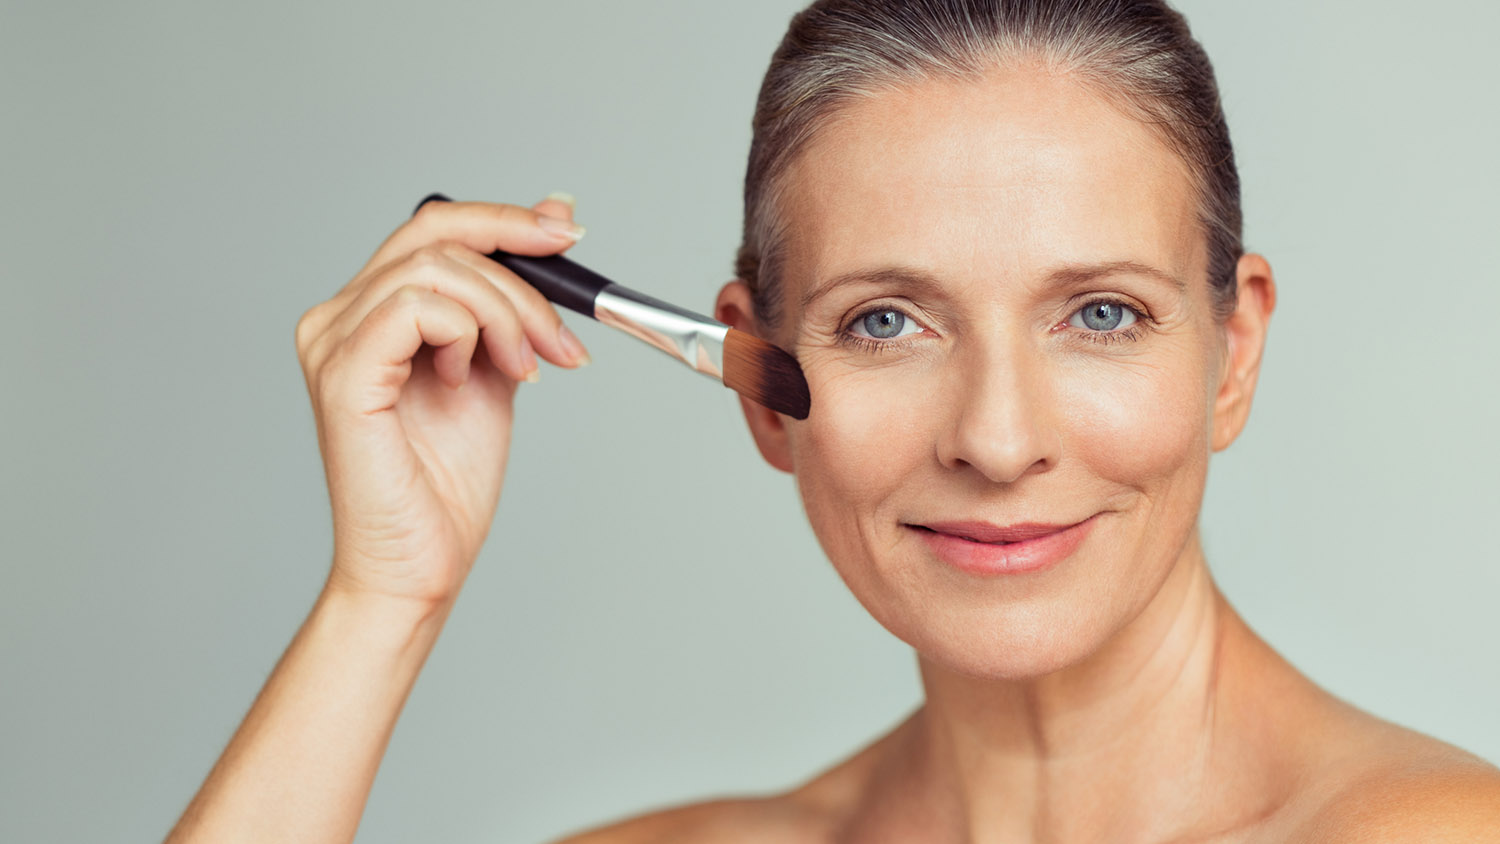 TOP 5 make-up propositions for mature women